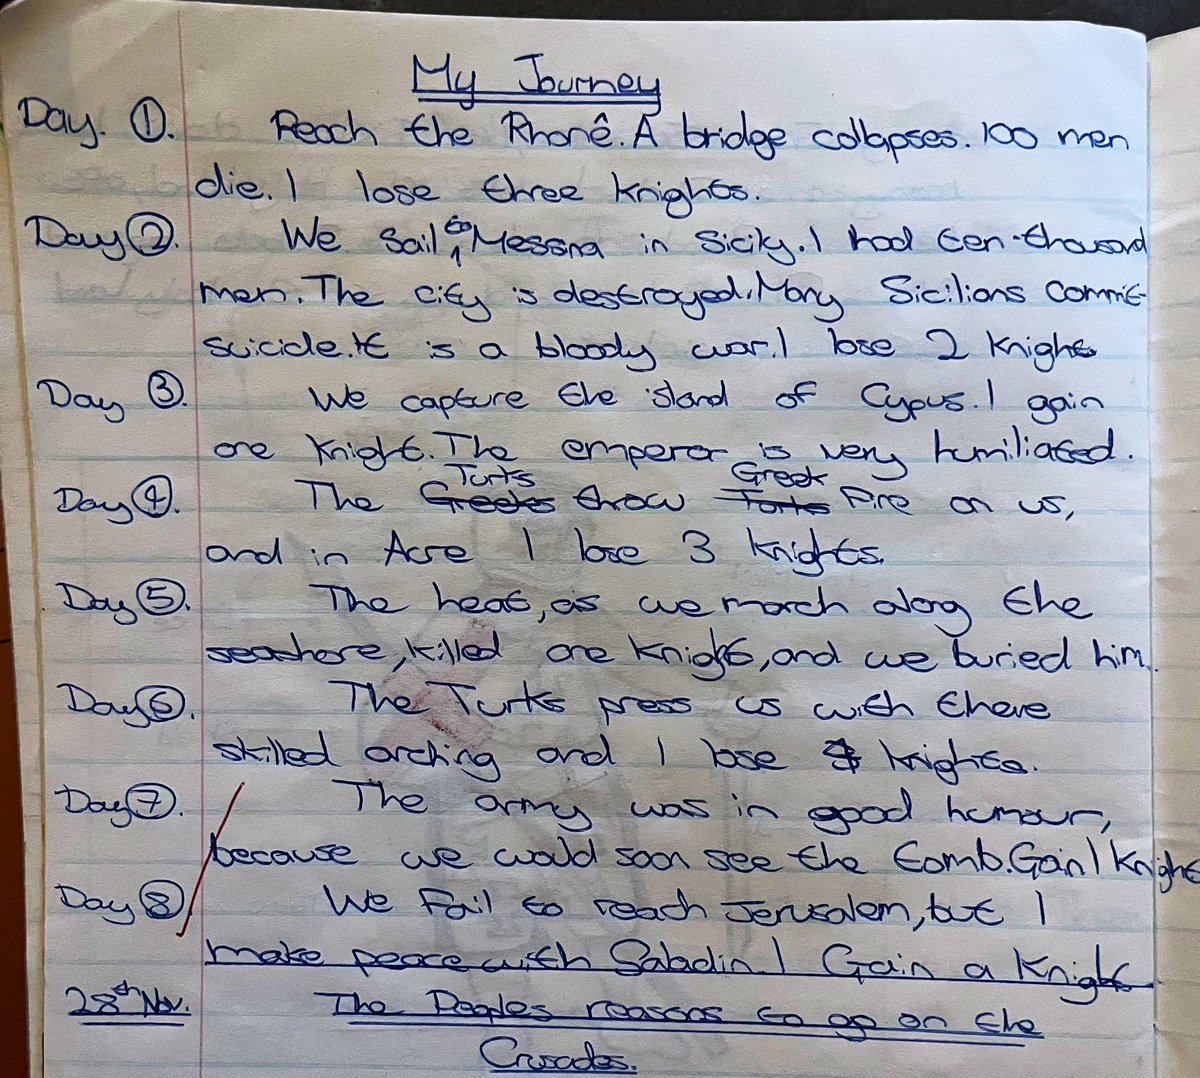 People often ask me why I became a medievalist. I never have a satisfactory answer. But I’ve just found my 1986 medieval history exercise book, in which an 11-year-old me described an imaginary “Maintown” c. 1300 and a failed crusade which culminated in making peace with Saladin.